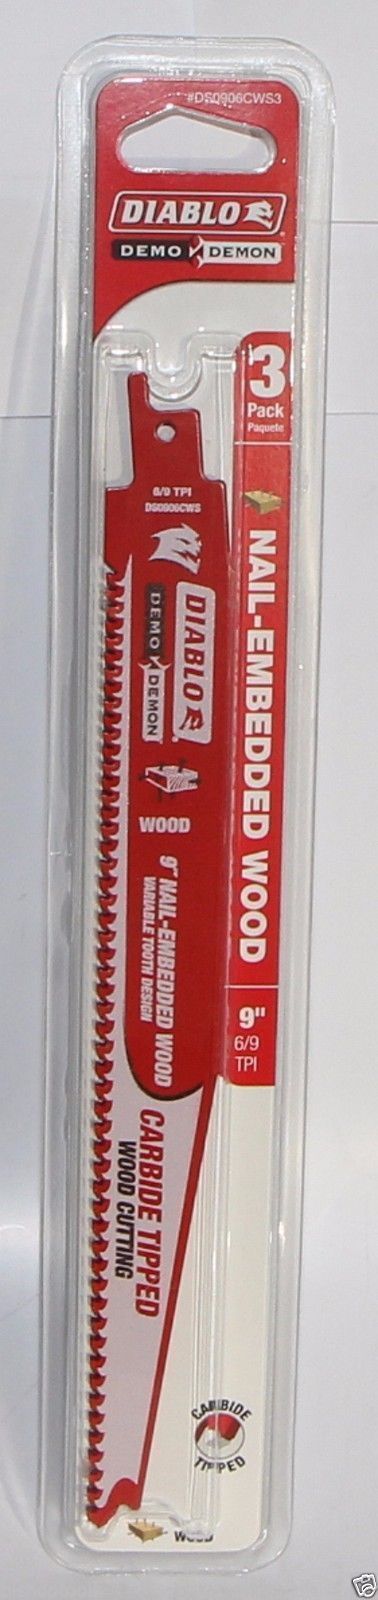 Diablo DS0906CWS3 9" x 6/9 TPI Wood Cutting Reciprocating Saw Blades 3 Pack